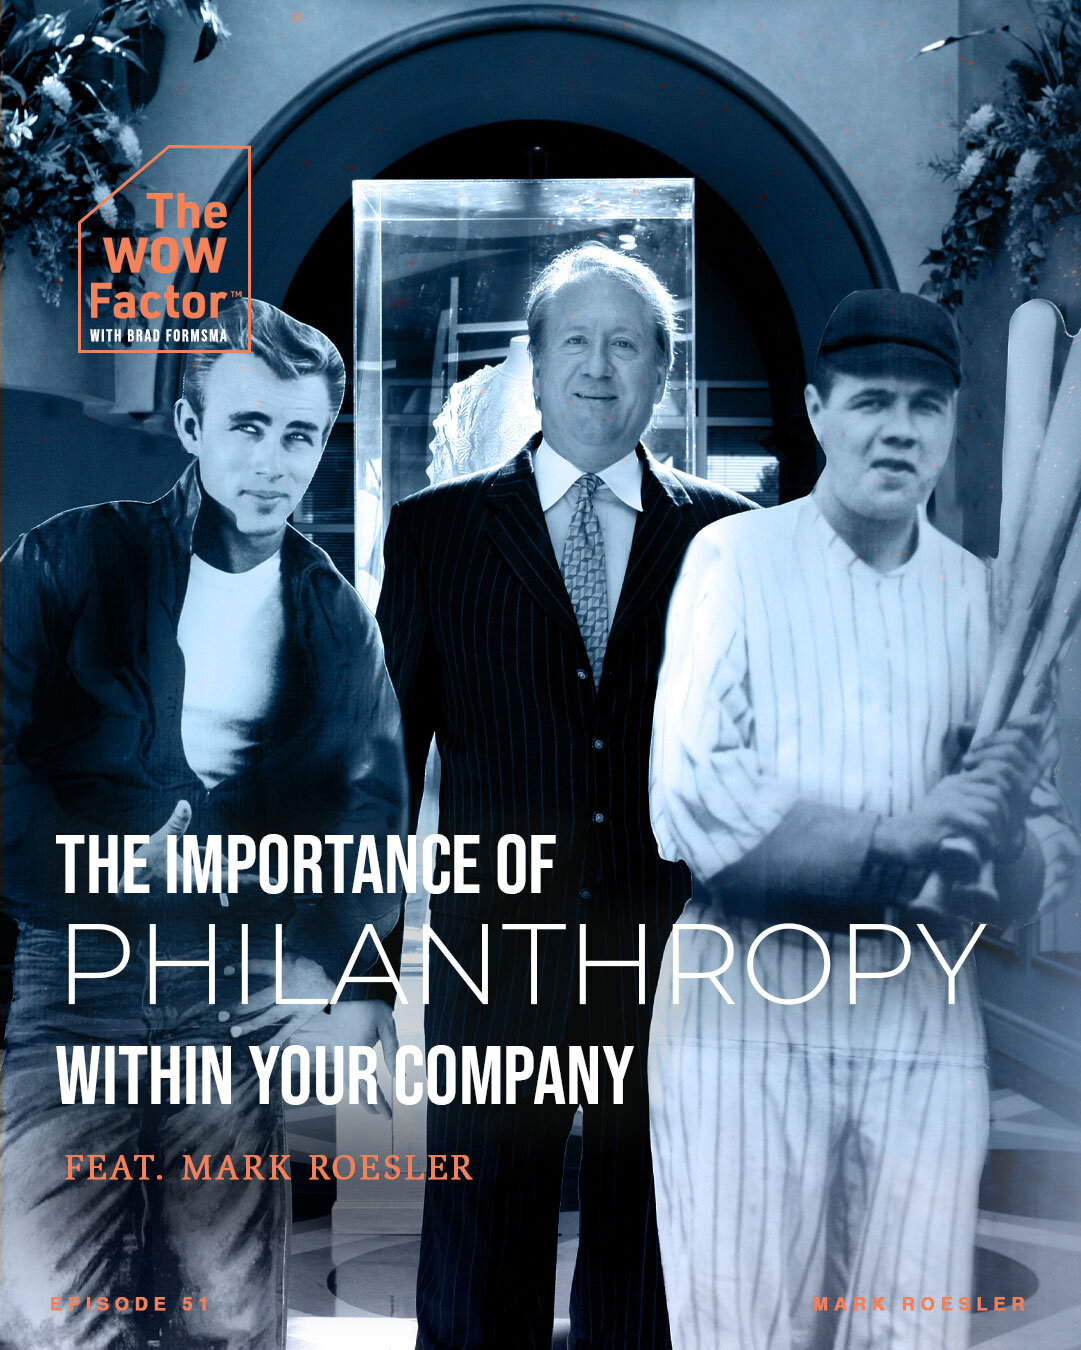 The WOW Factor With Brad Formsma – The Importance Of Philanthropy Within Your Company Ft. Mark Roesler